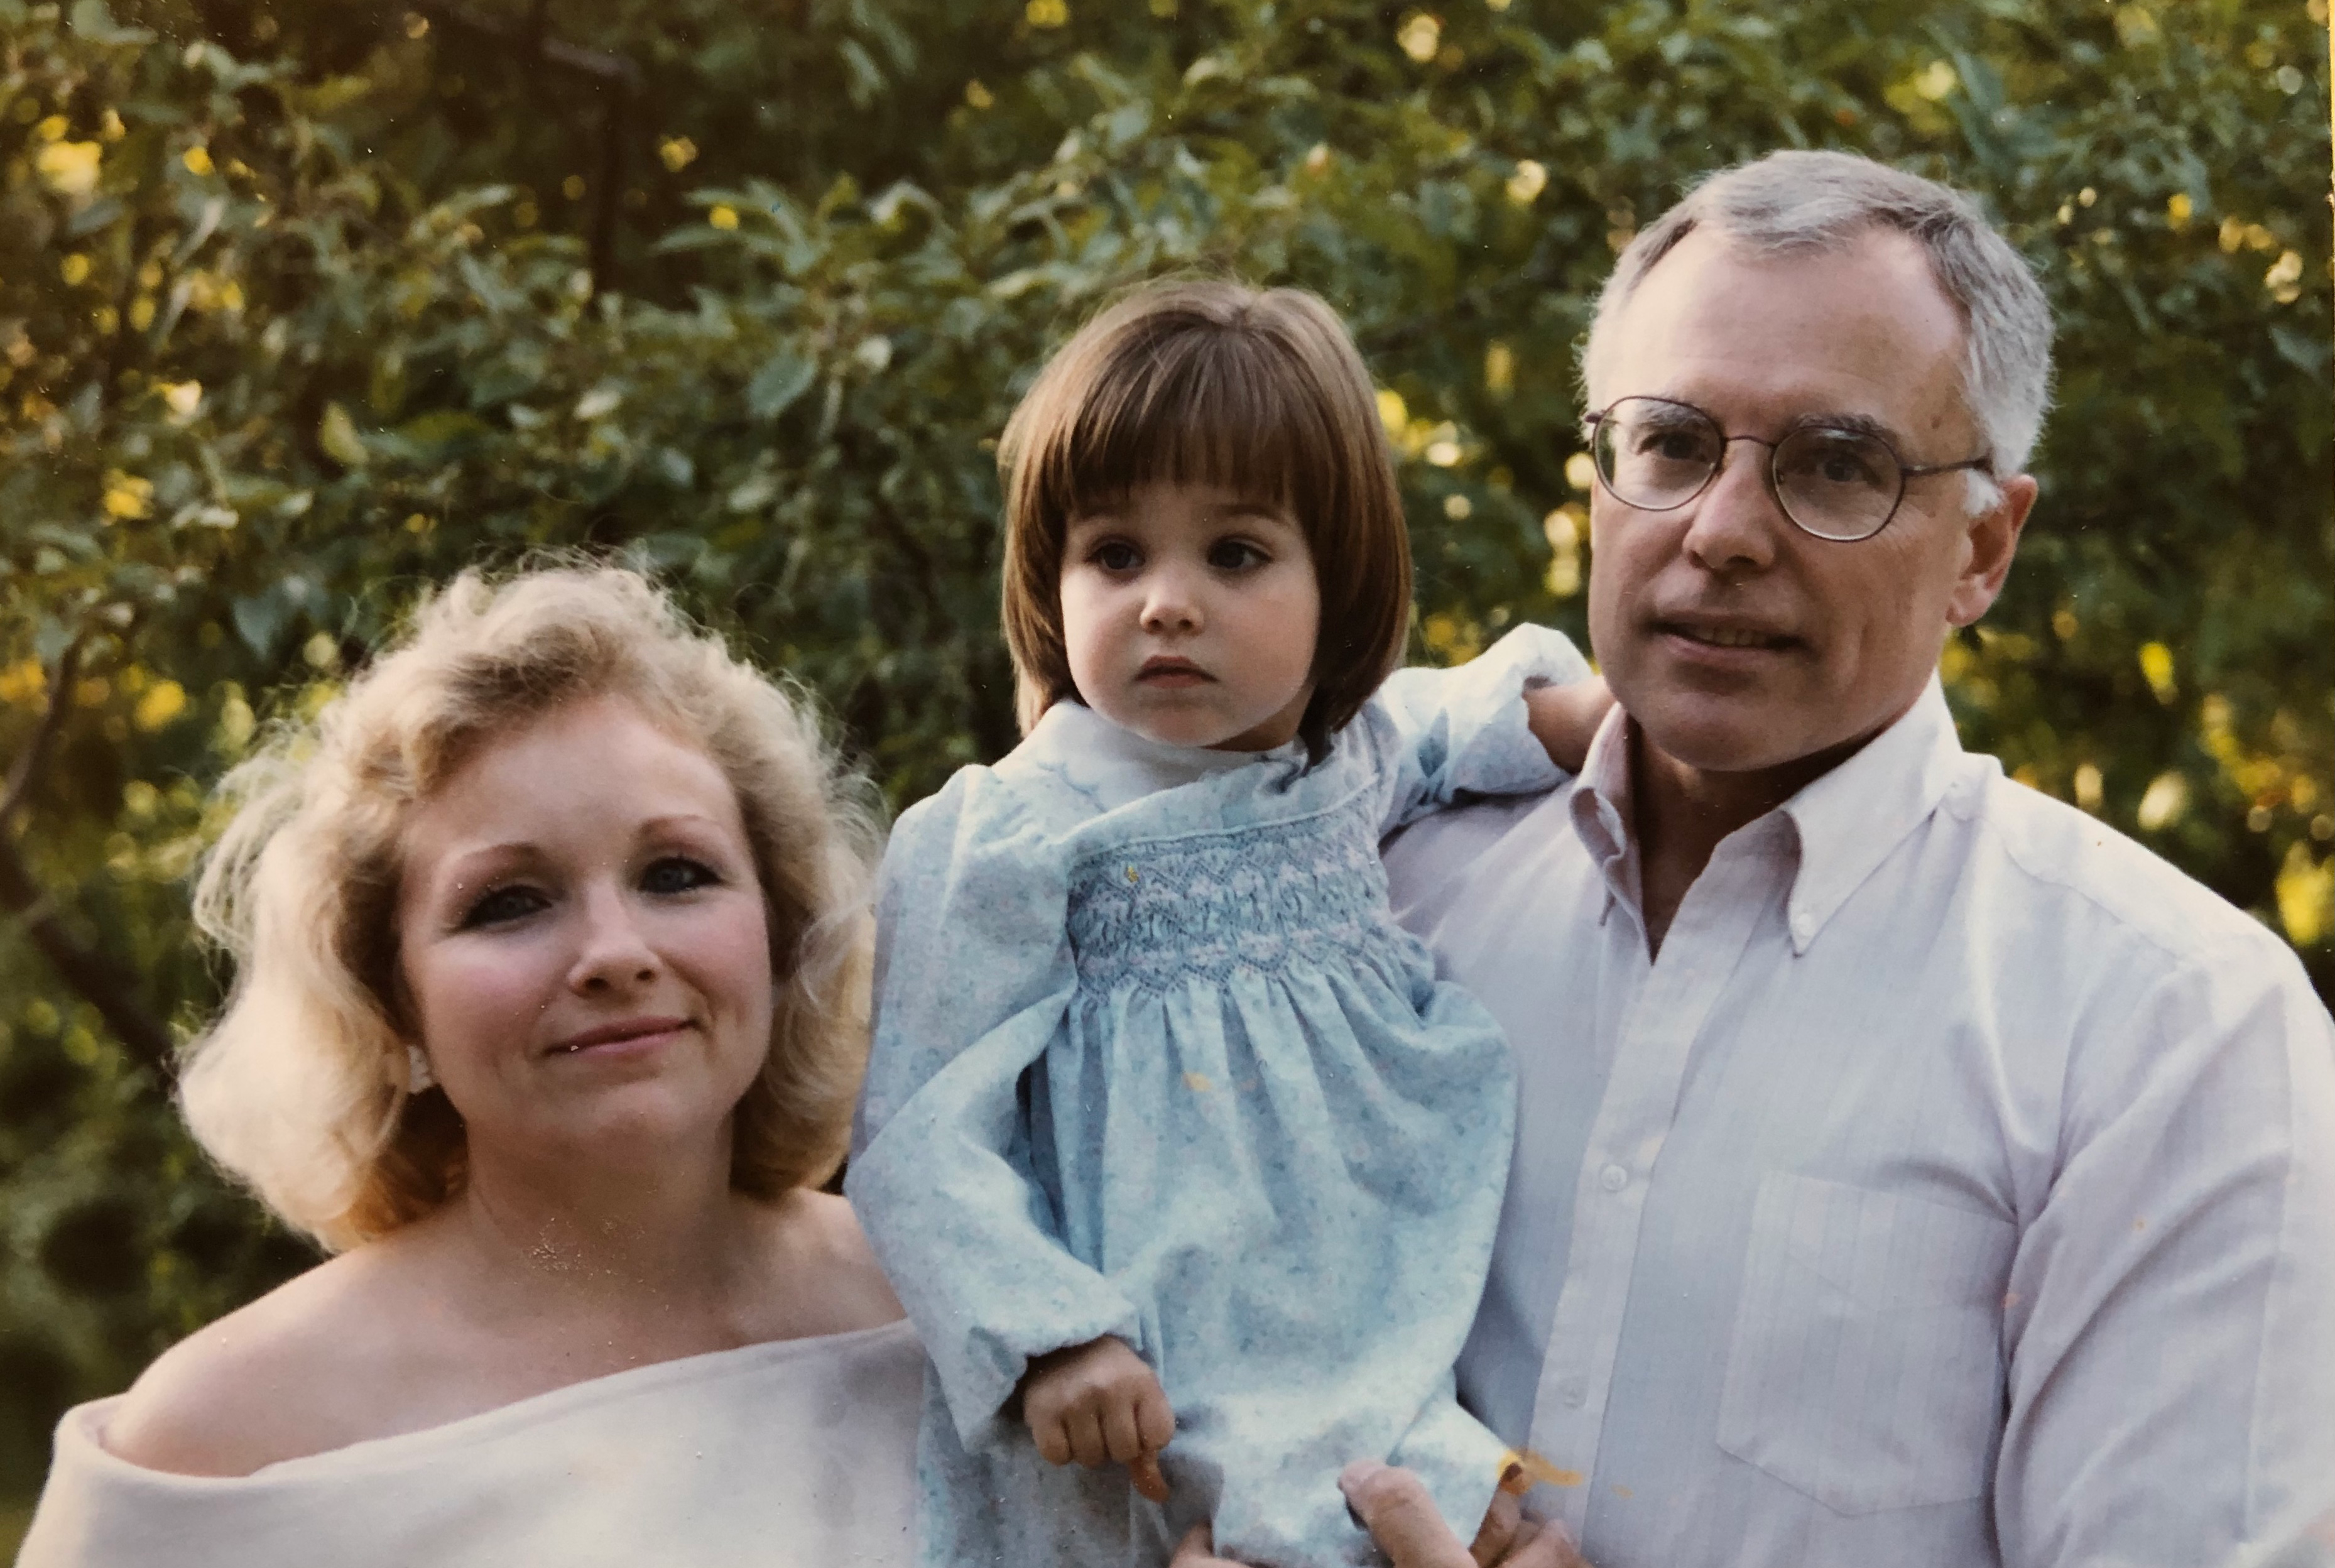 A photo of a young mother, infant girl, and father posing for a photo with greenery in the background